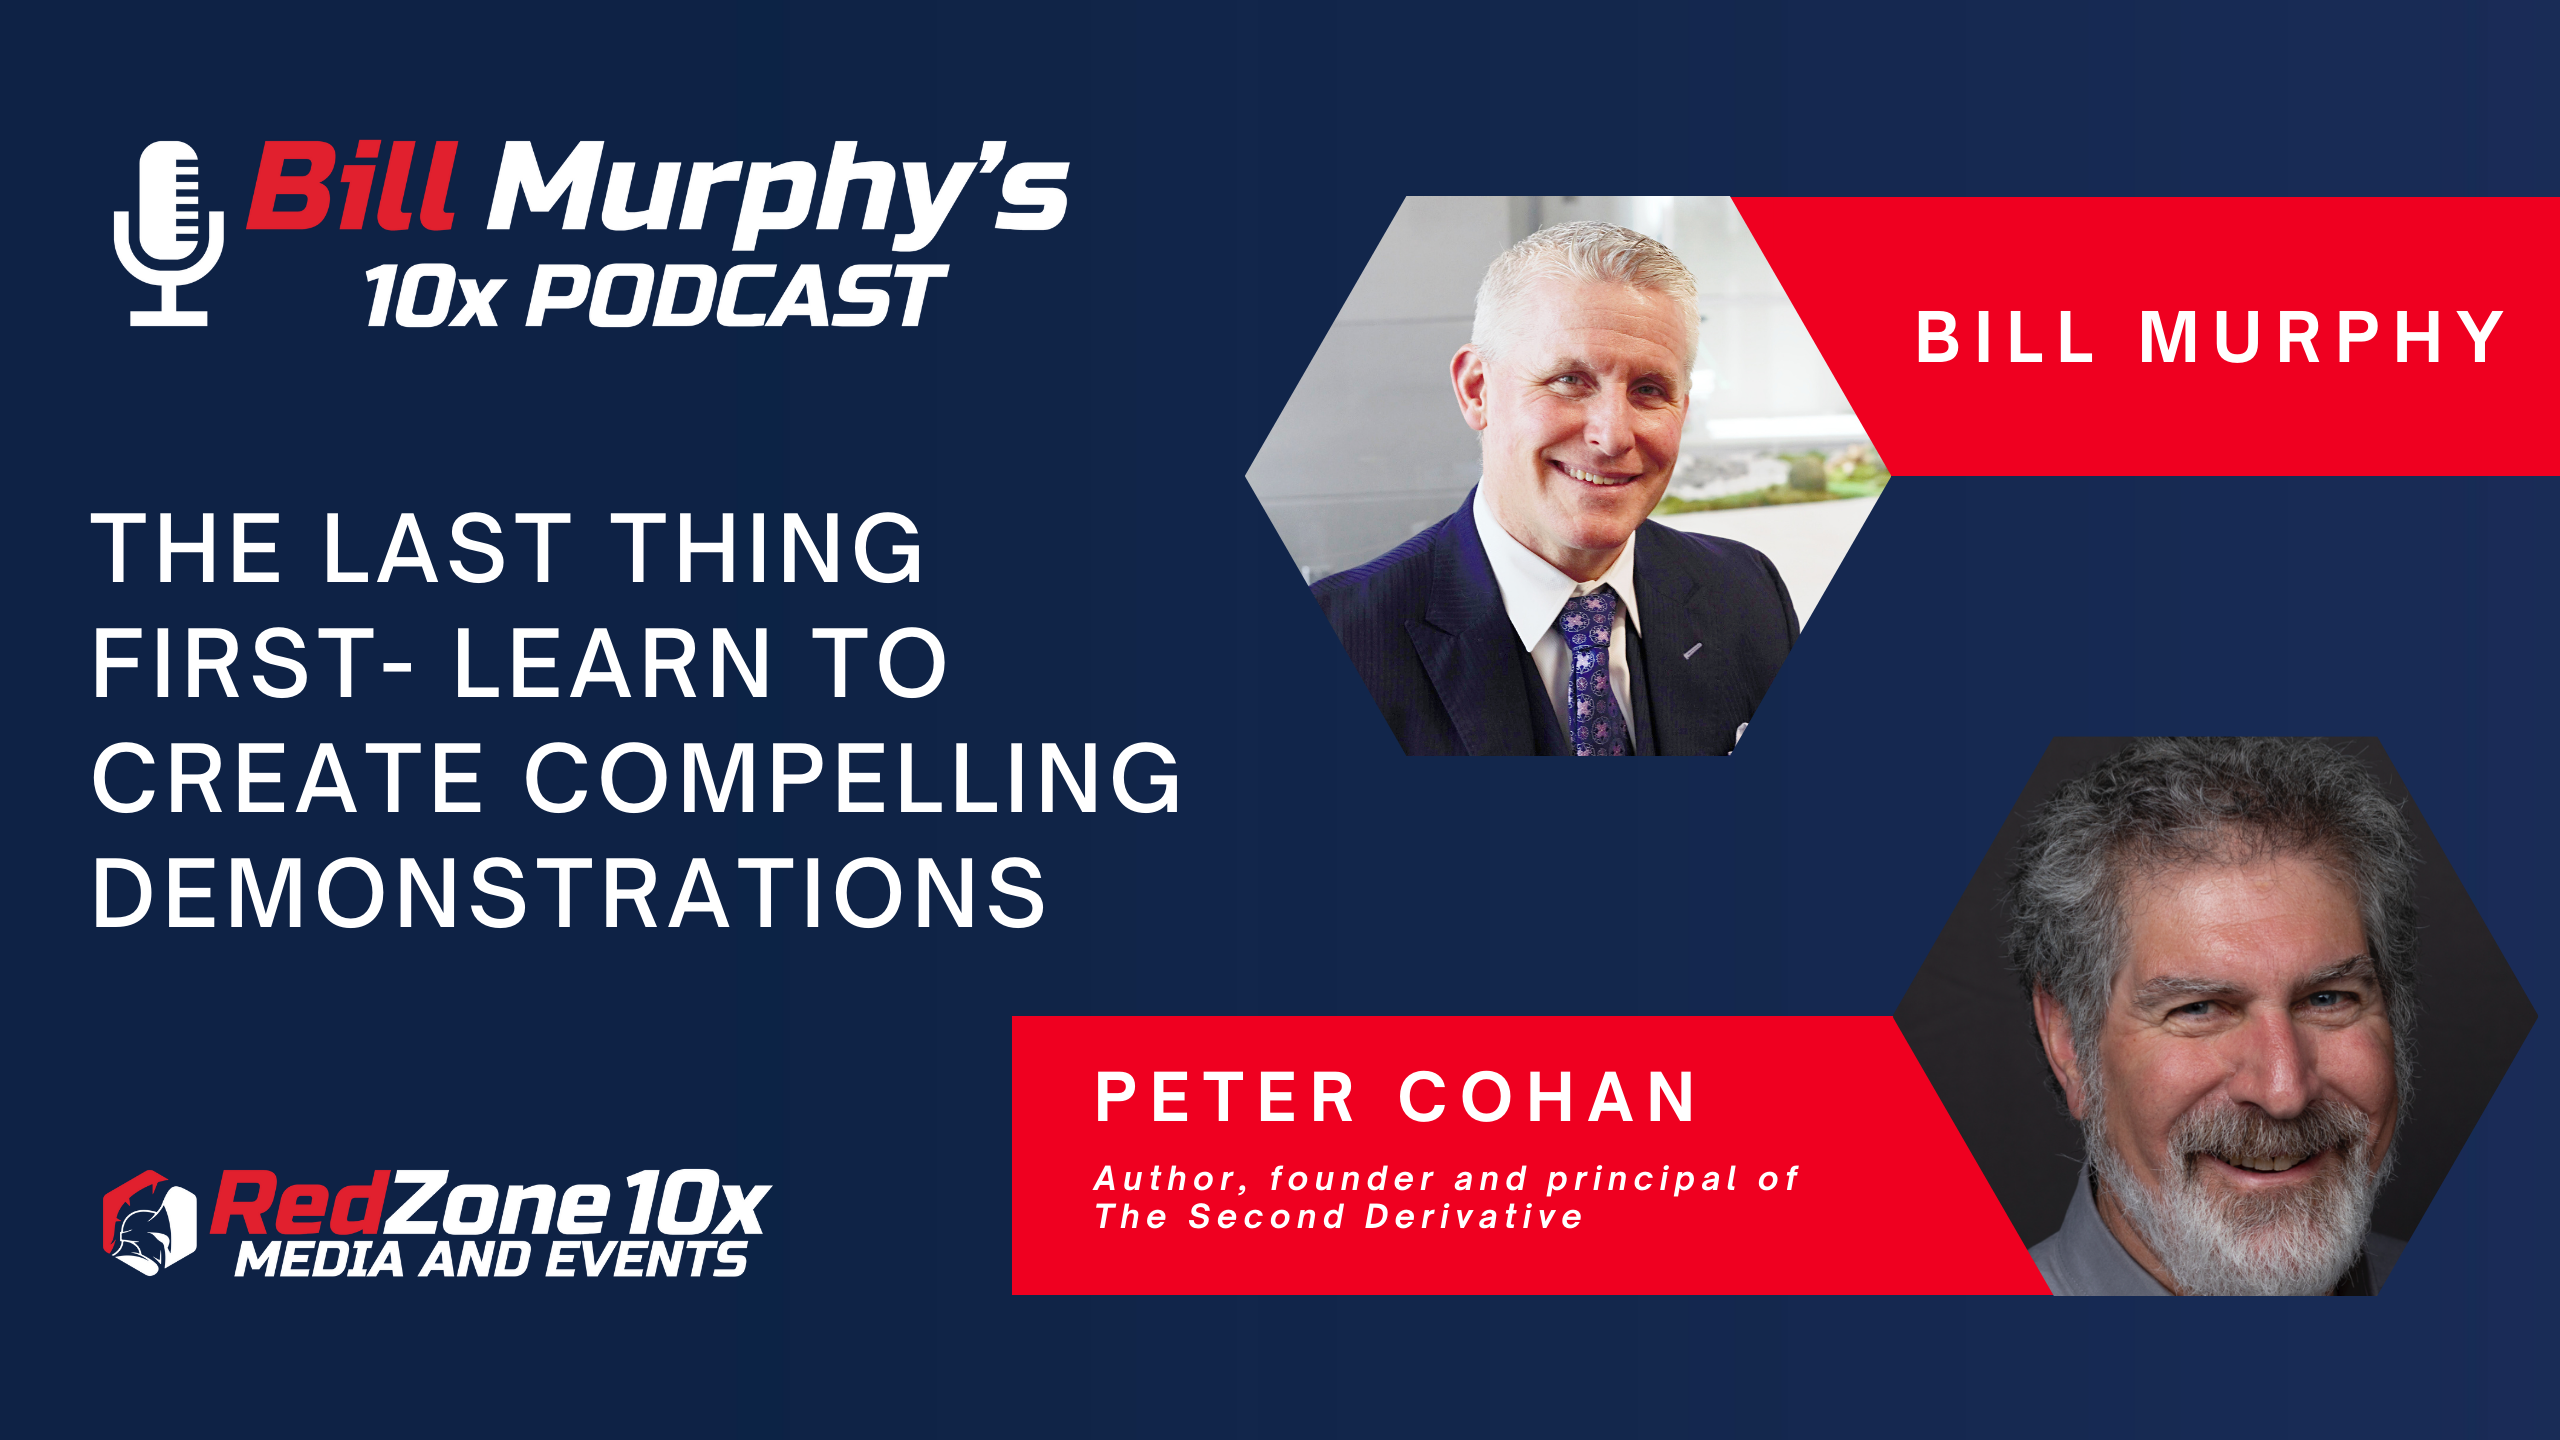 Bill Murphy's RedZone Podcast - The Last Thing First - Learn to Create Compelling Demonstrations with Peter Cohan 